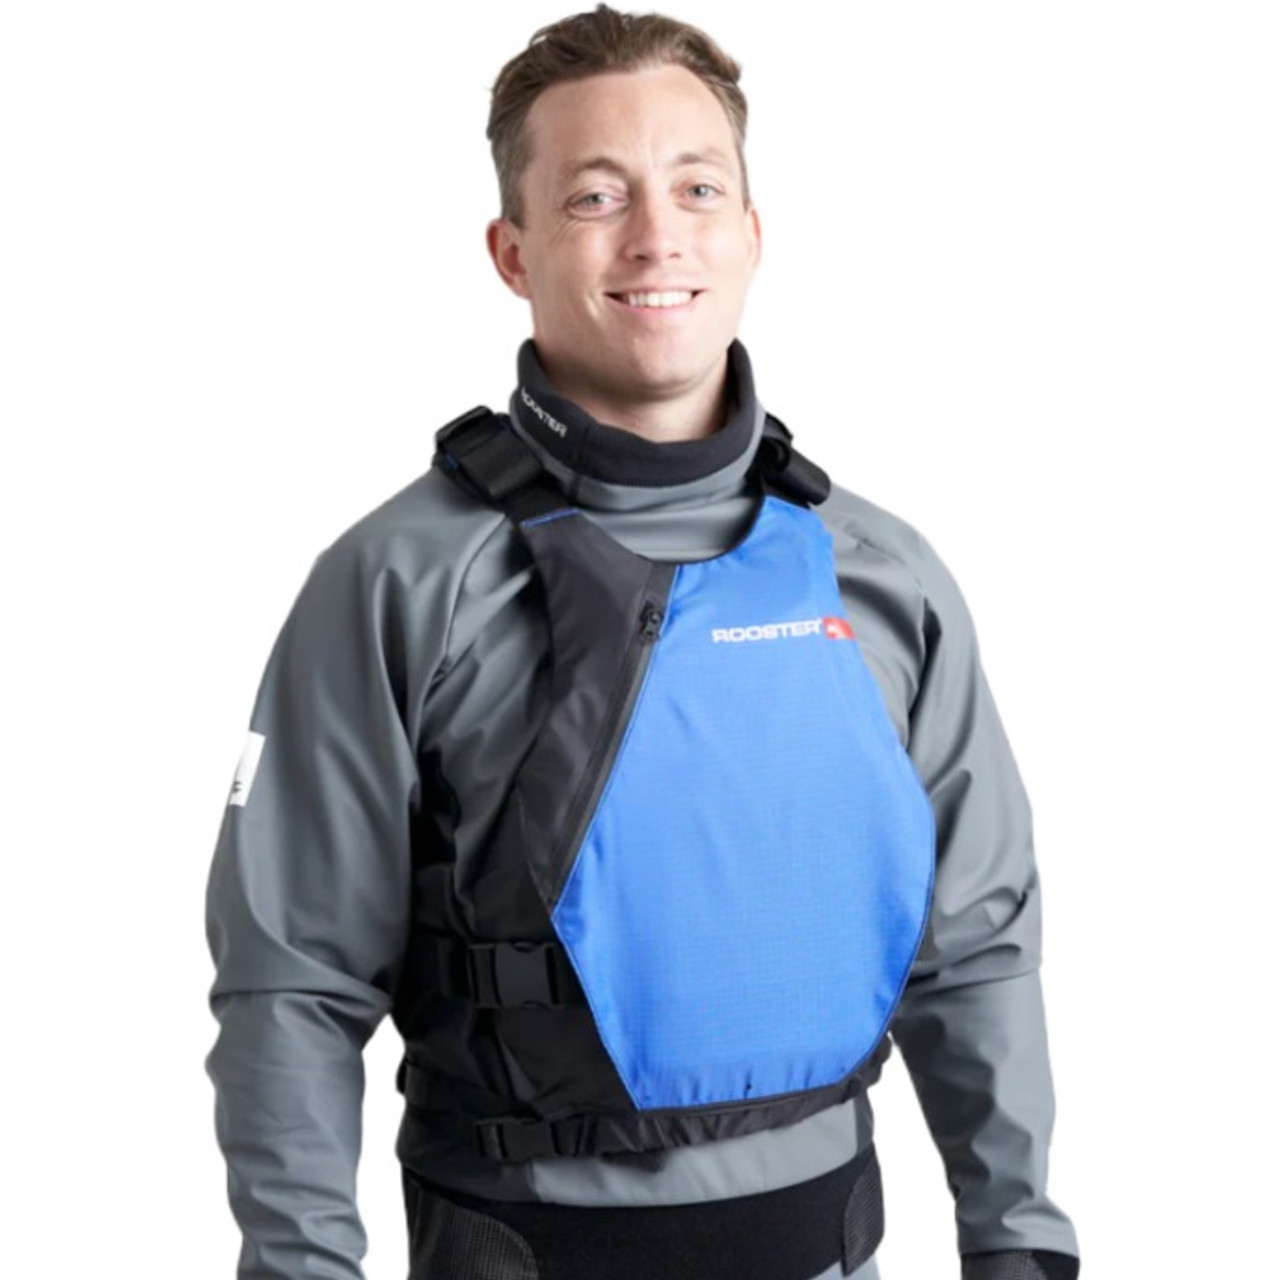 Rooster USCG Approved PFD  West Coast Sailing - Sailing Life Jackets